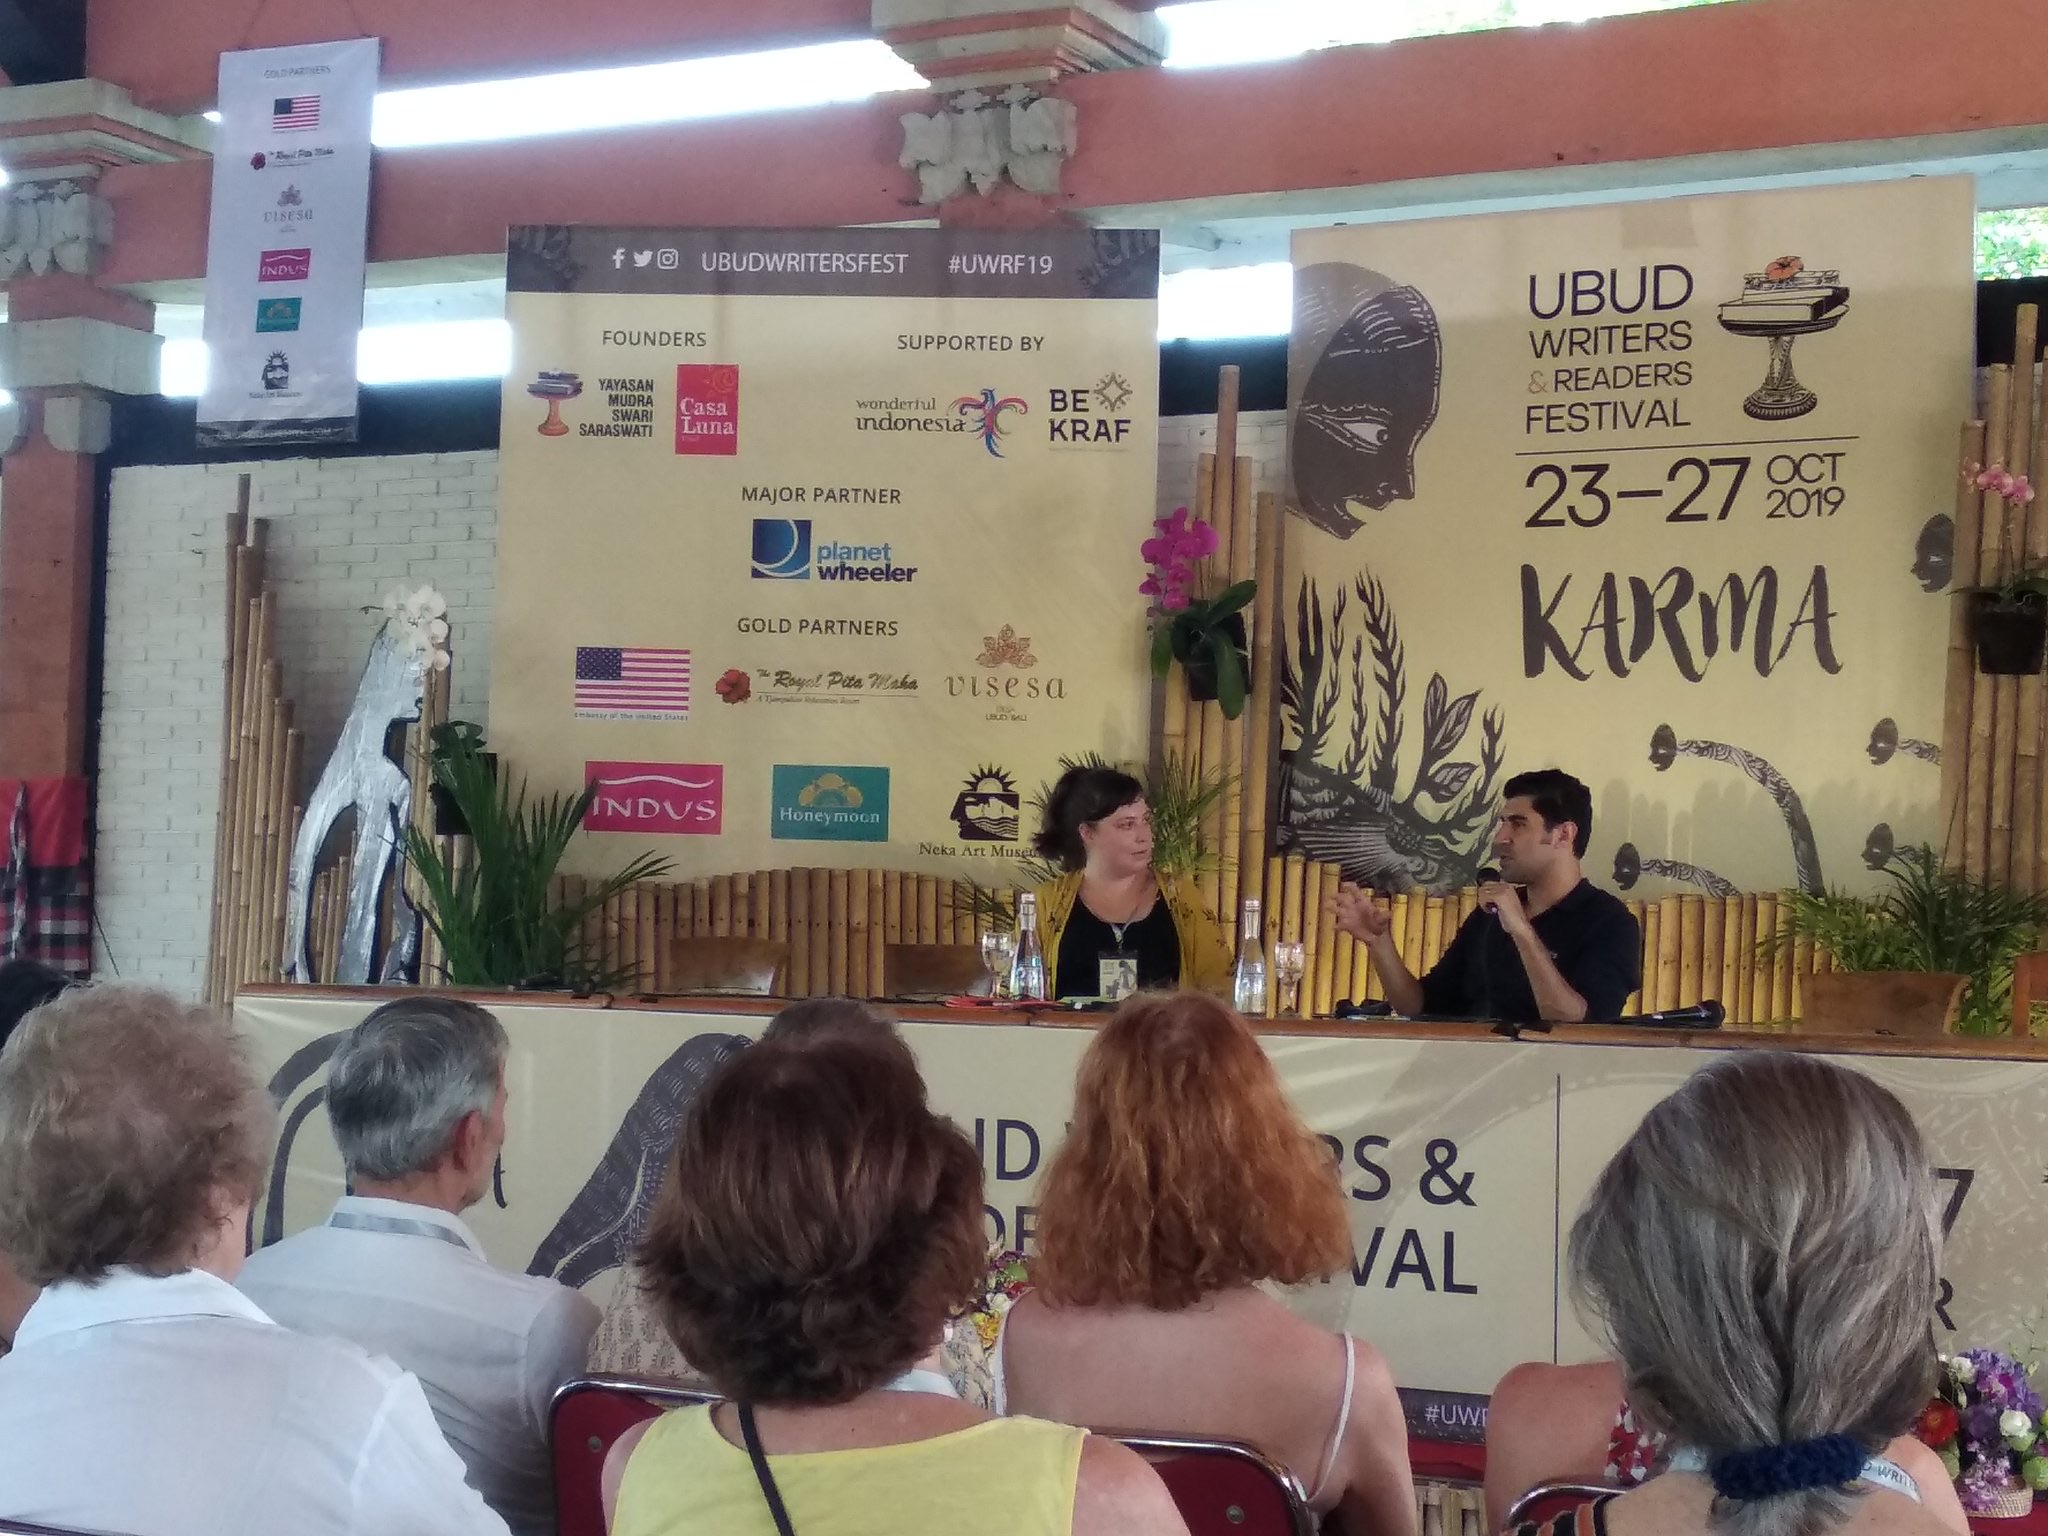 Discussing the Asian Future at the Ubud Writers Festival